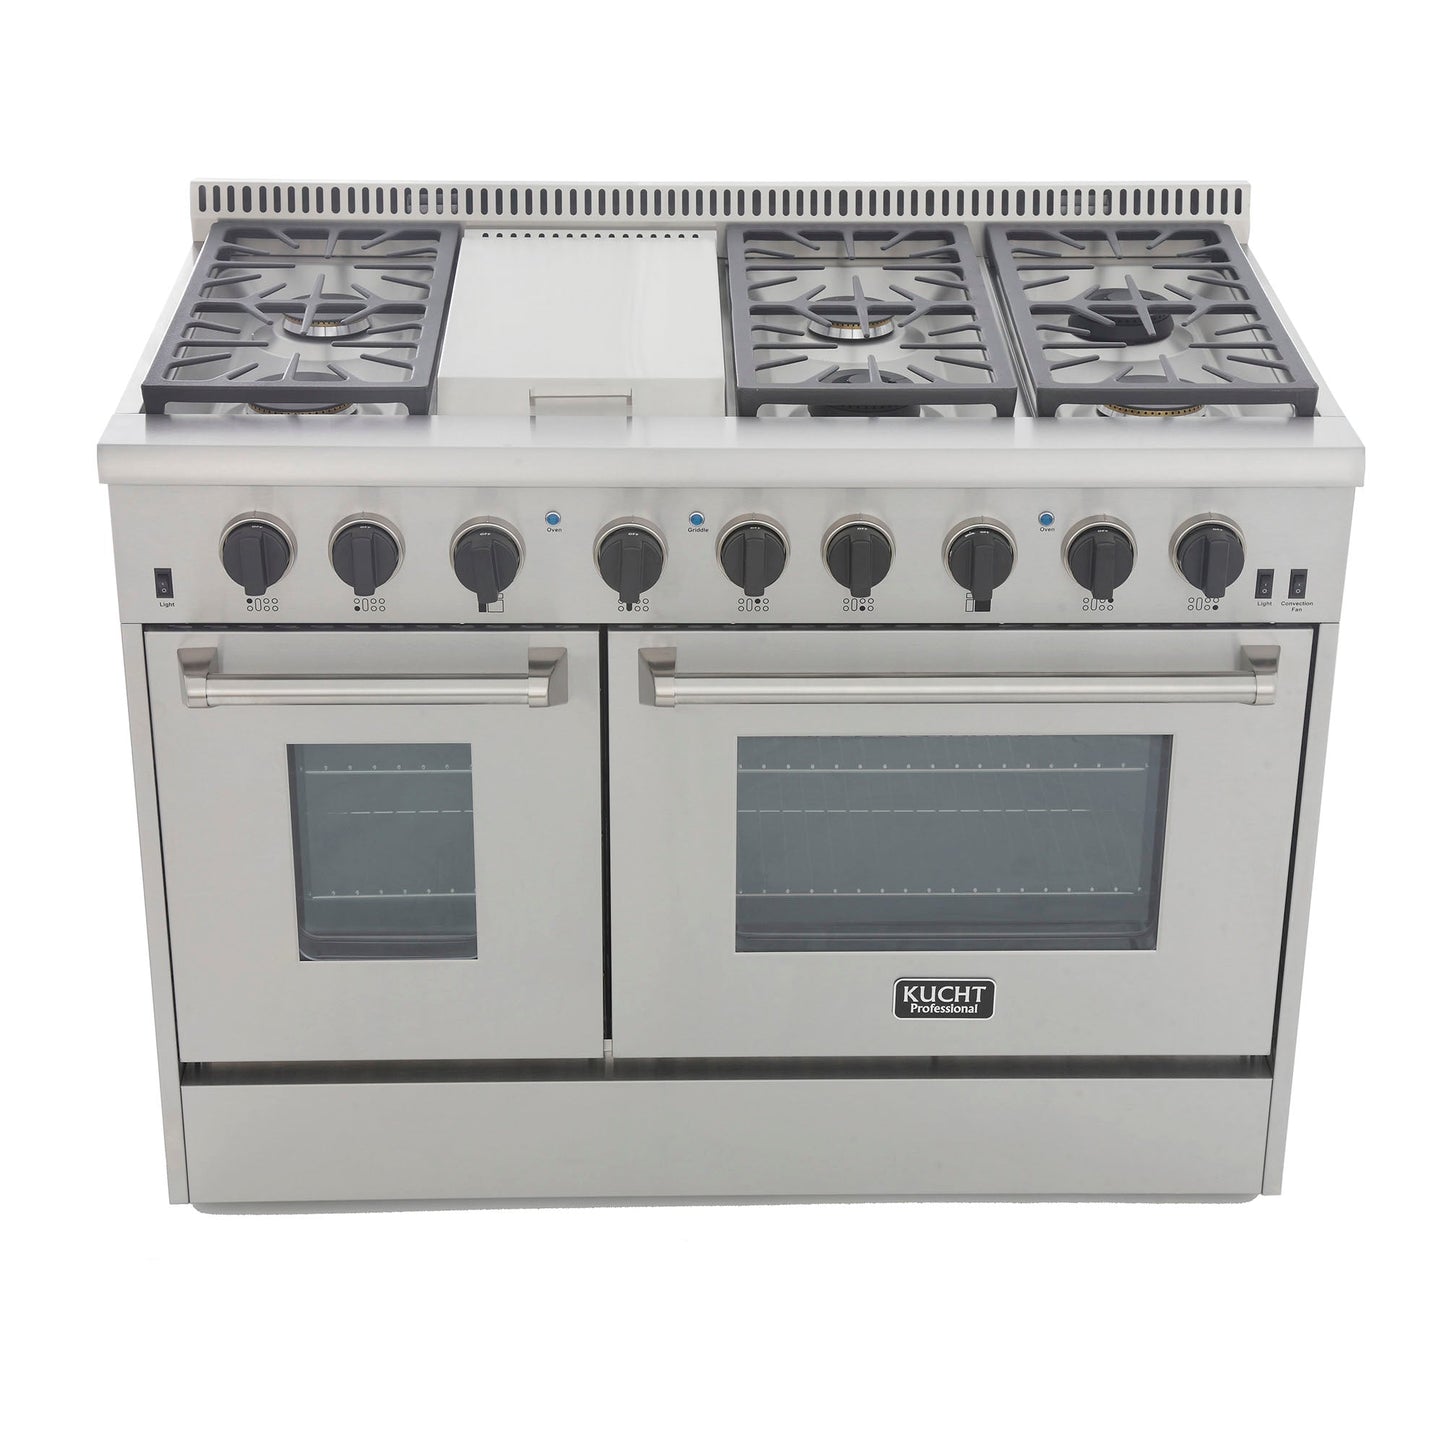 Kucht KRD Series 48" Freestanding Natural Gas Dual Fuel Range With 6 Burners, Griddle and Tuxedo Black Knobs